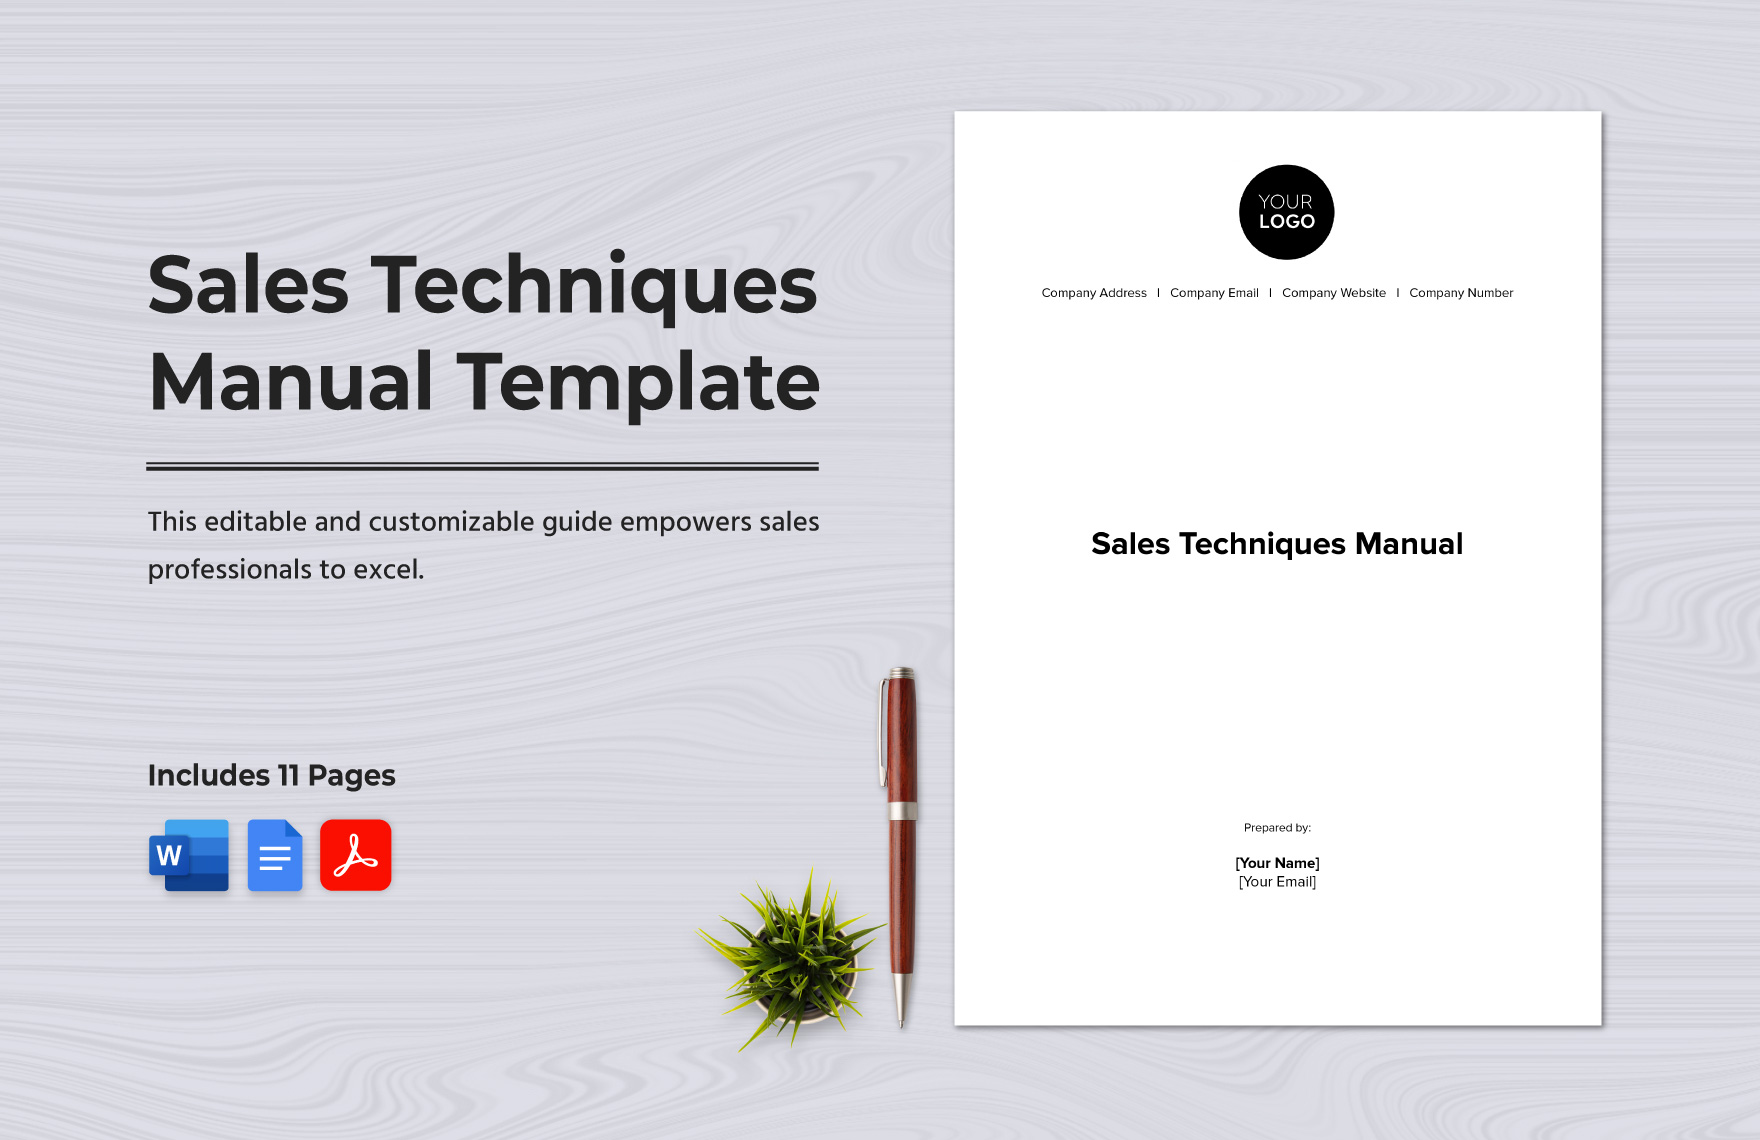 Sales Techniques Manual Template in Word, Google Docs, PDF